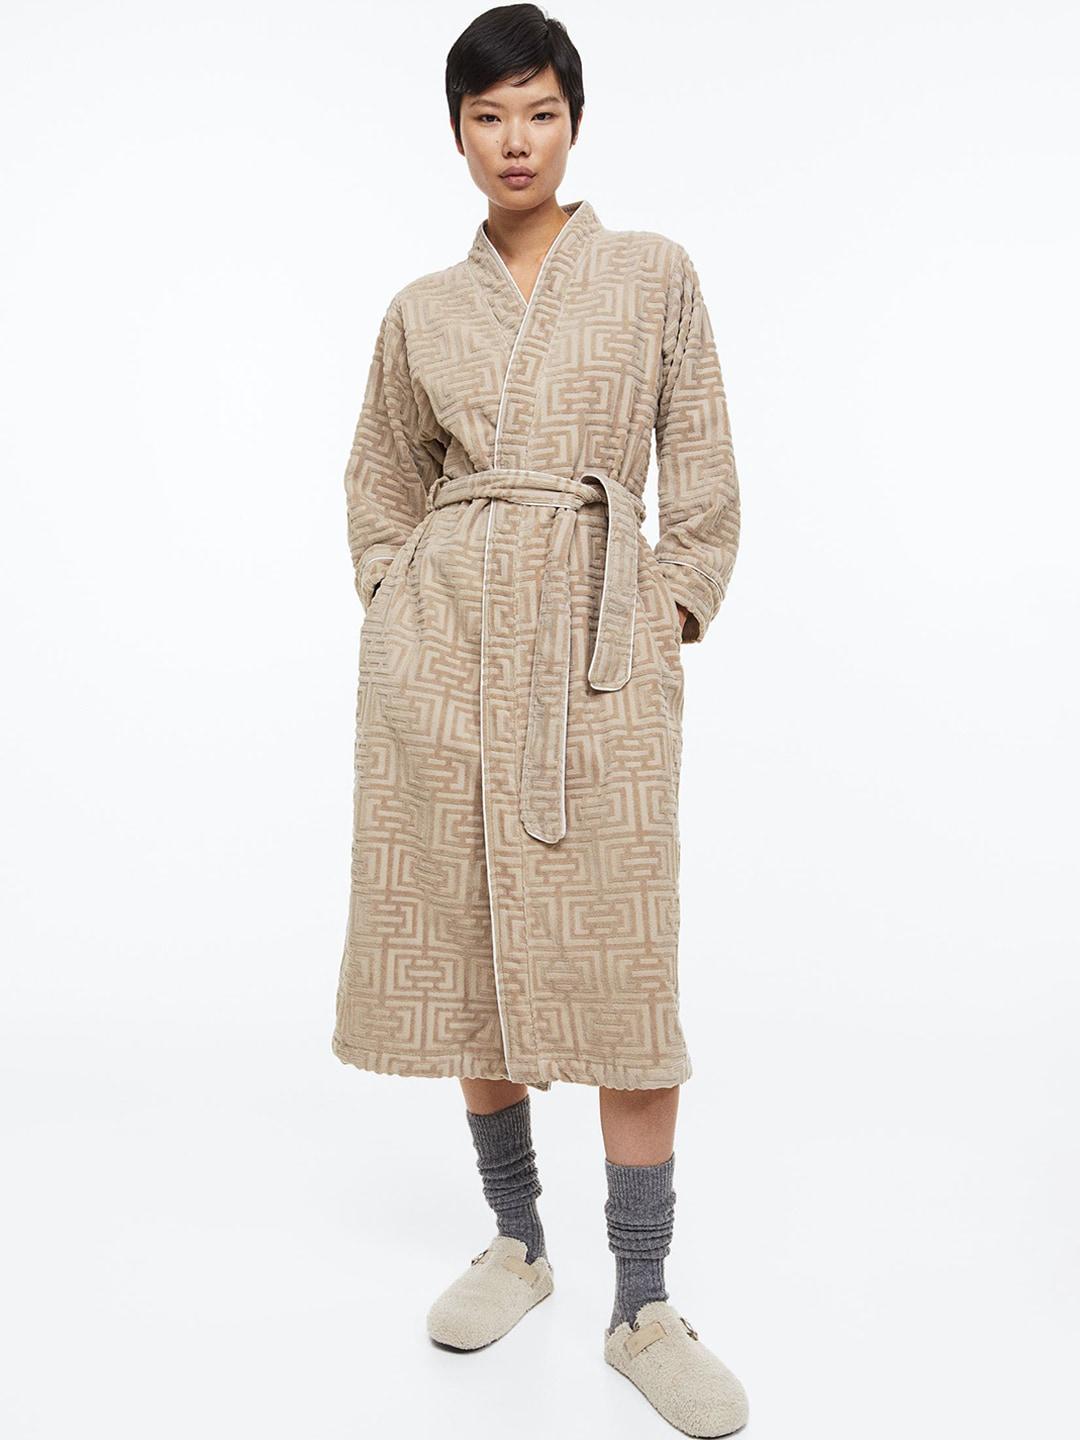 h&m jacquard-patterned pure cotton dressing gown